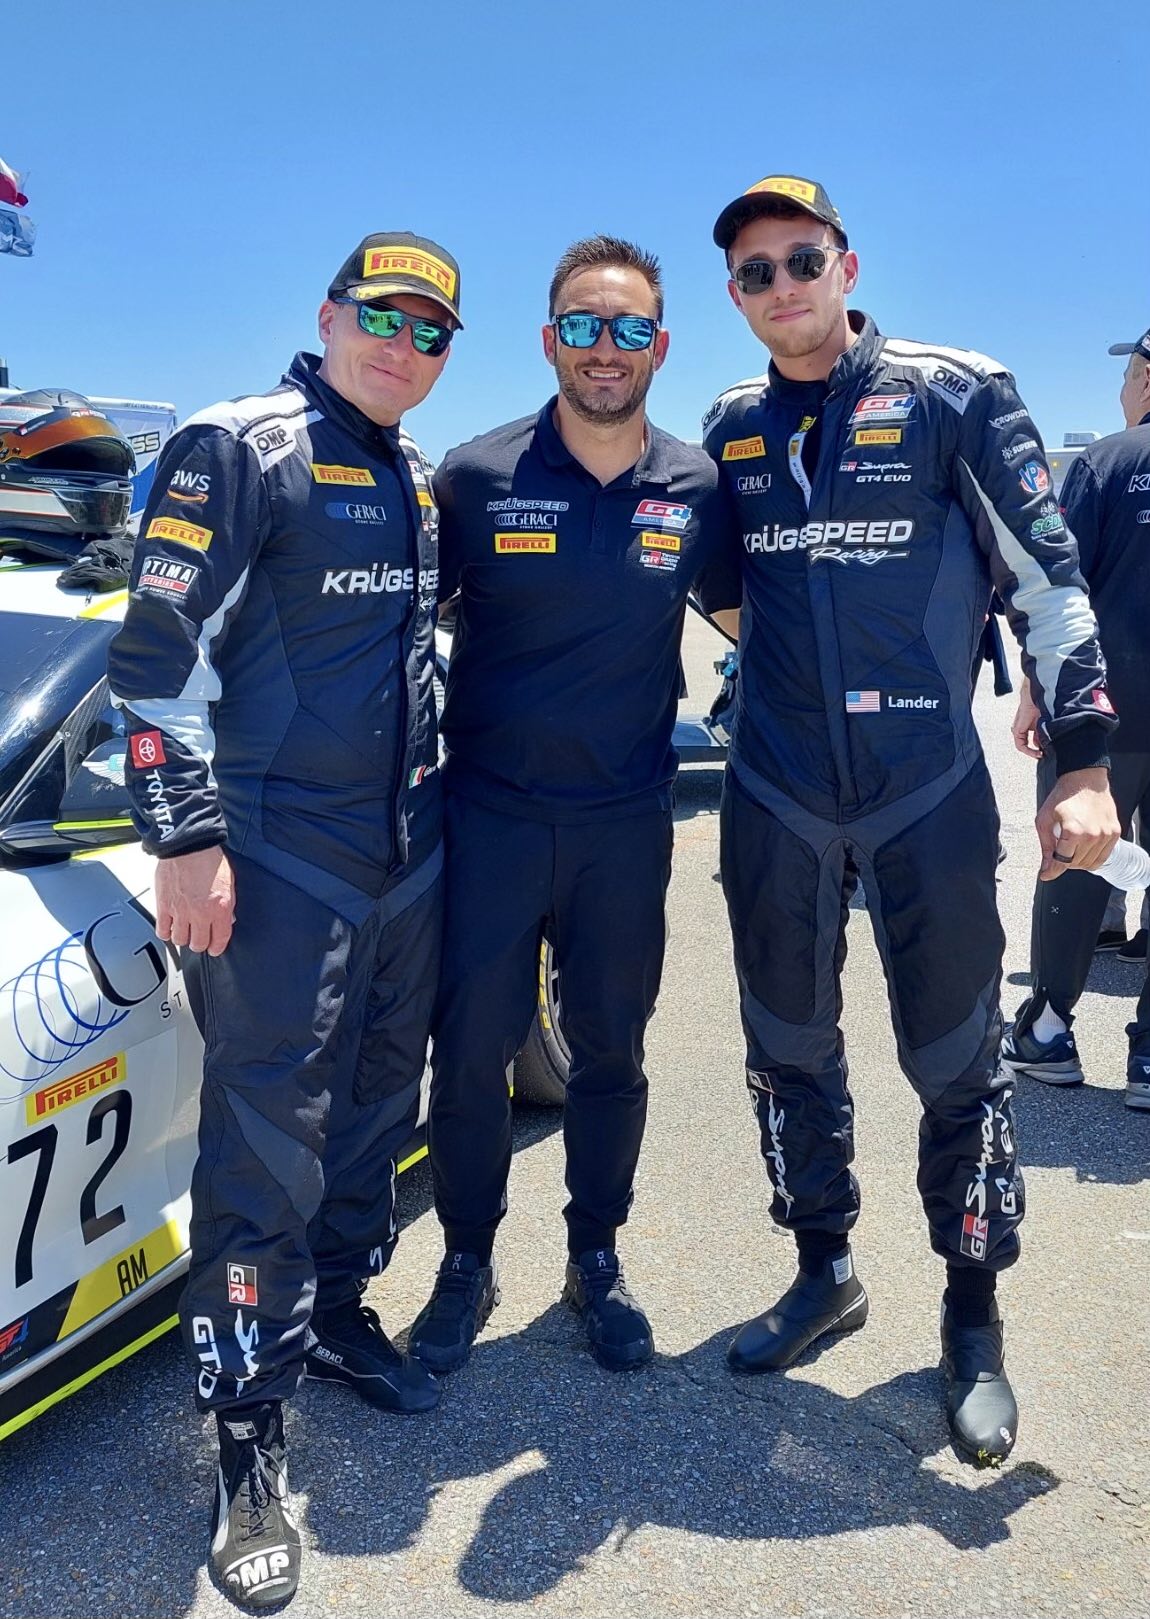 Jaden Lander and Anthony Geraci had a spectacular season in the SRO GT4 class, with several podium finishes and vying for wins. The GT4 competition was fierce!